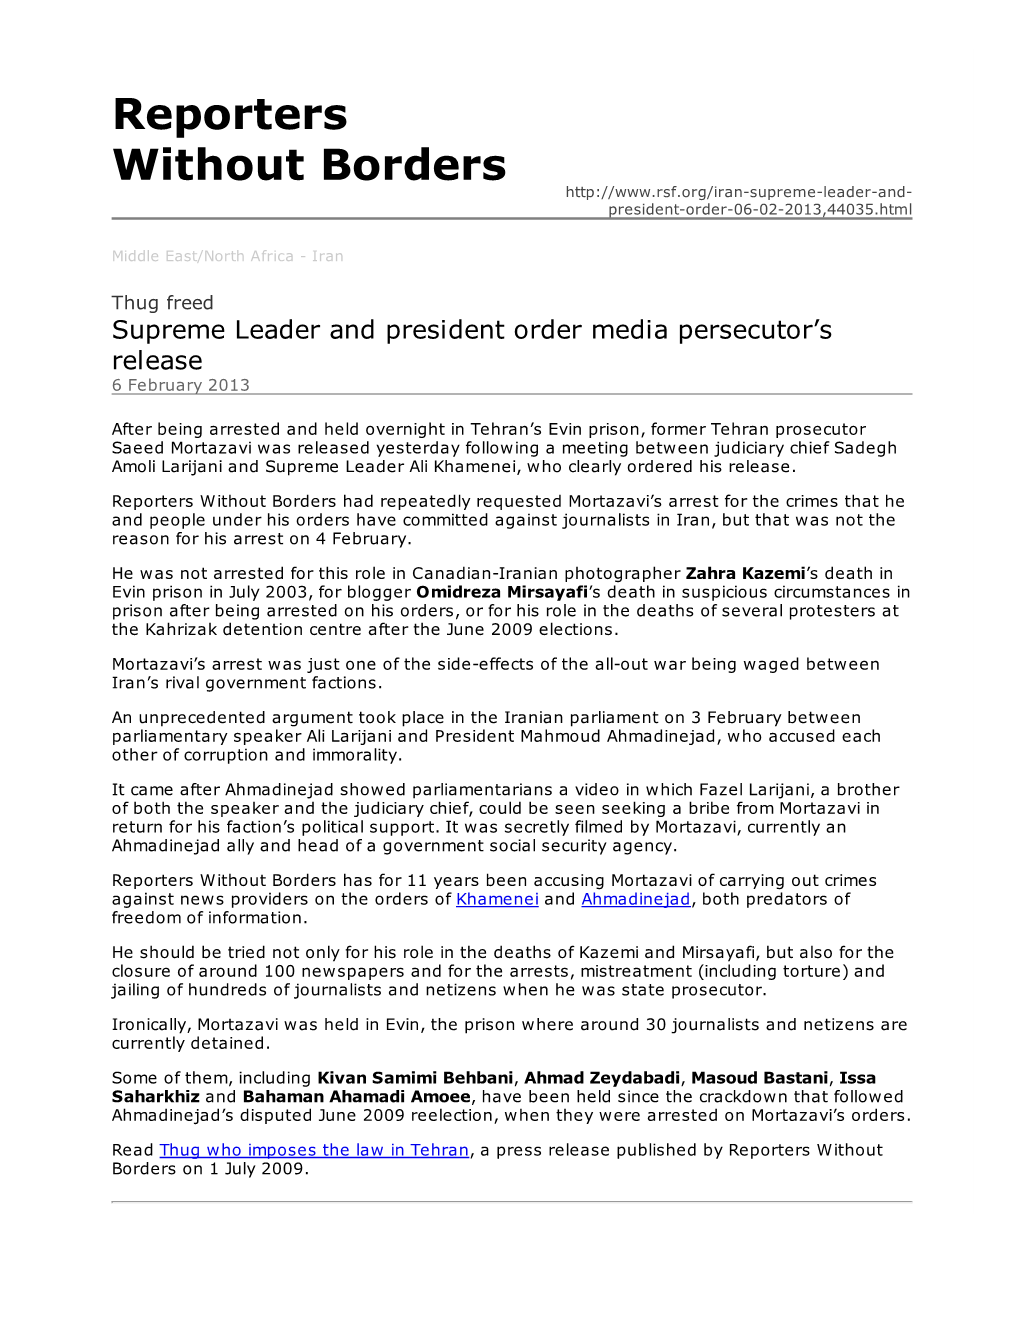 Reporters Without Borders President-Order-06-02-2013,44035.Html